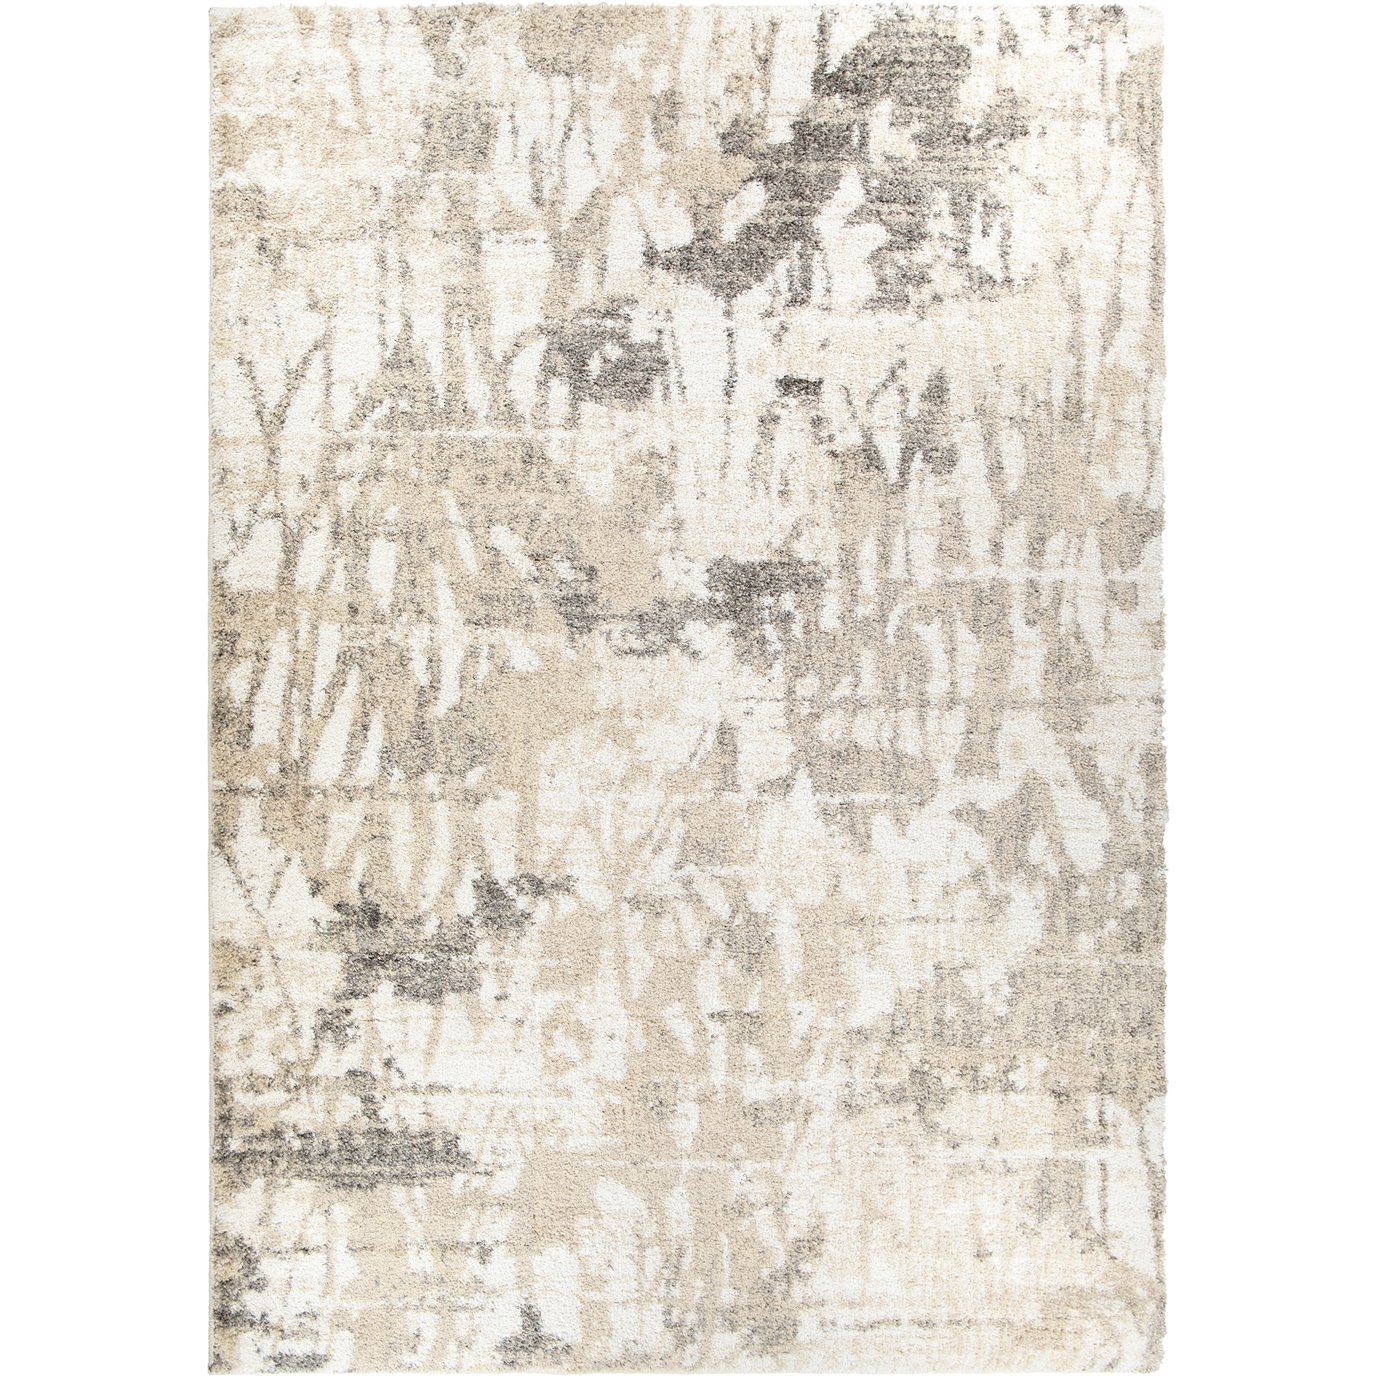 Abstract Canopy - Natural 5'3" X 7'6" Rug